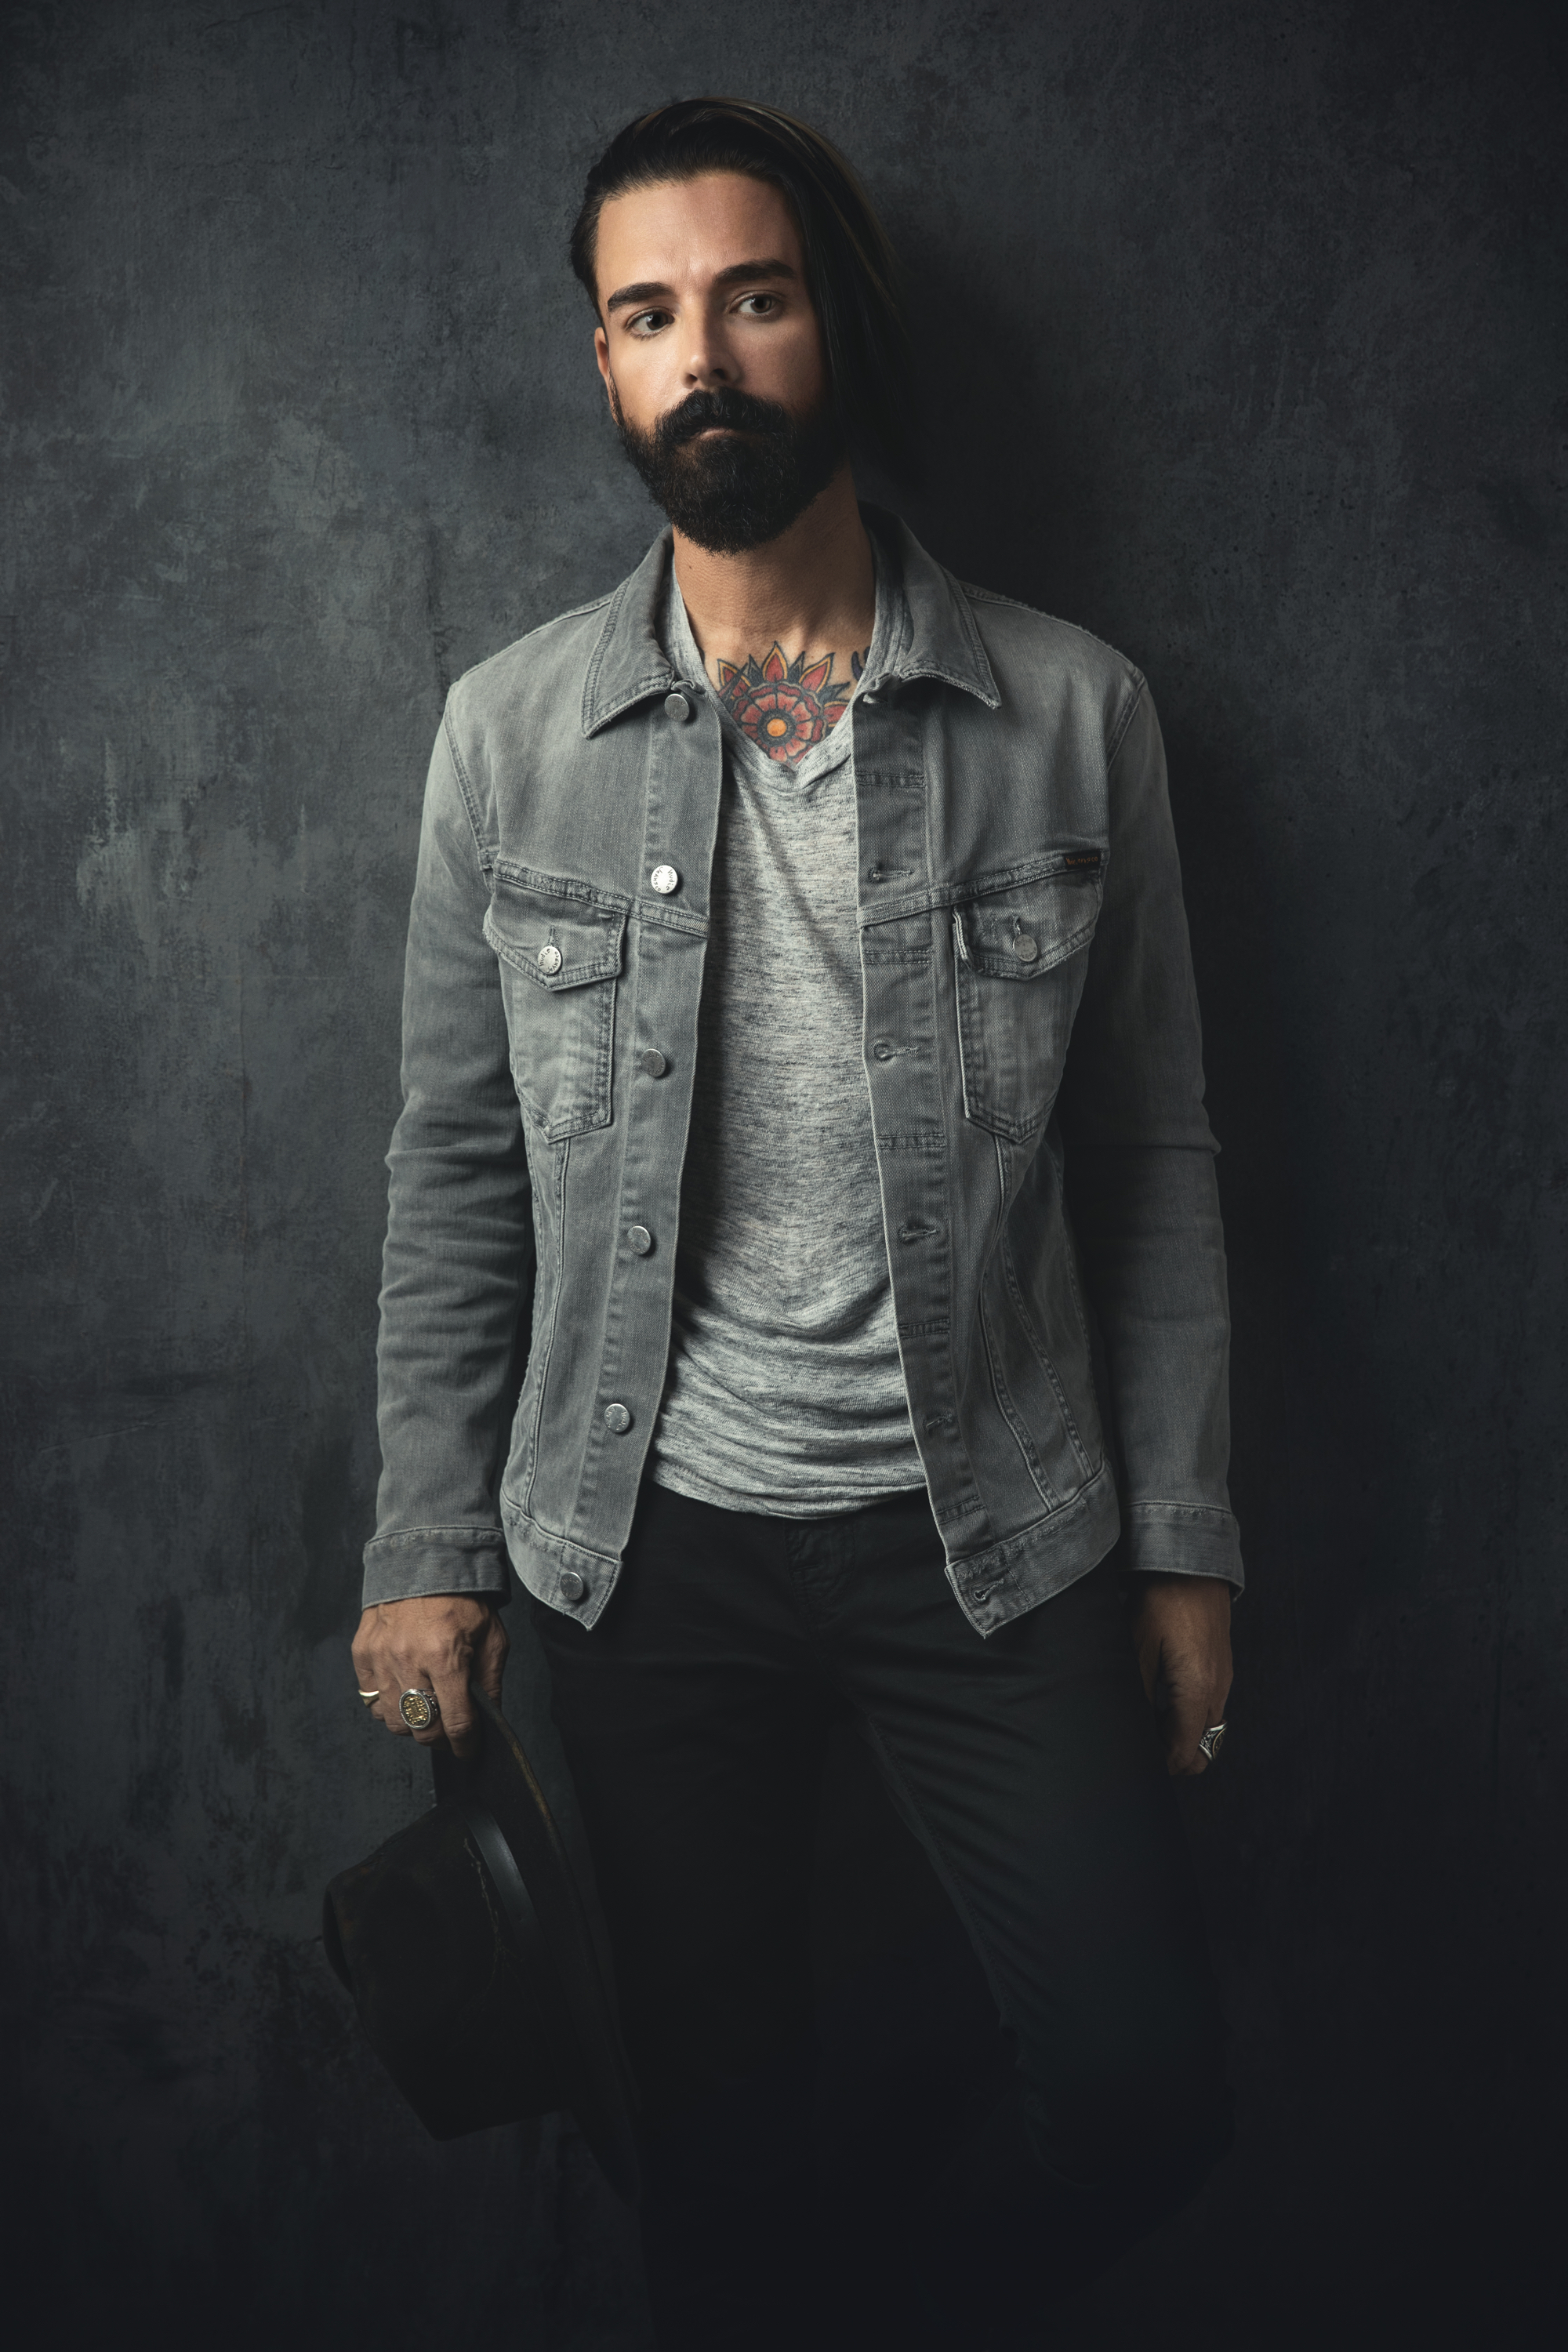 Chris Carrabba of Dashboard Confessional